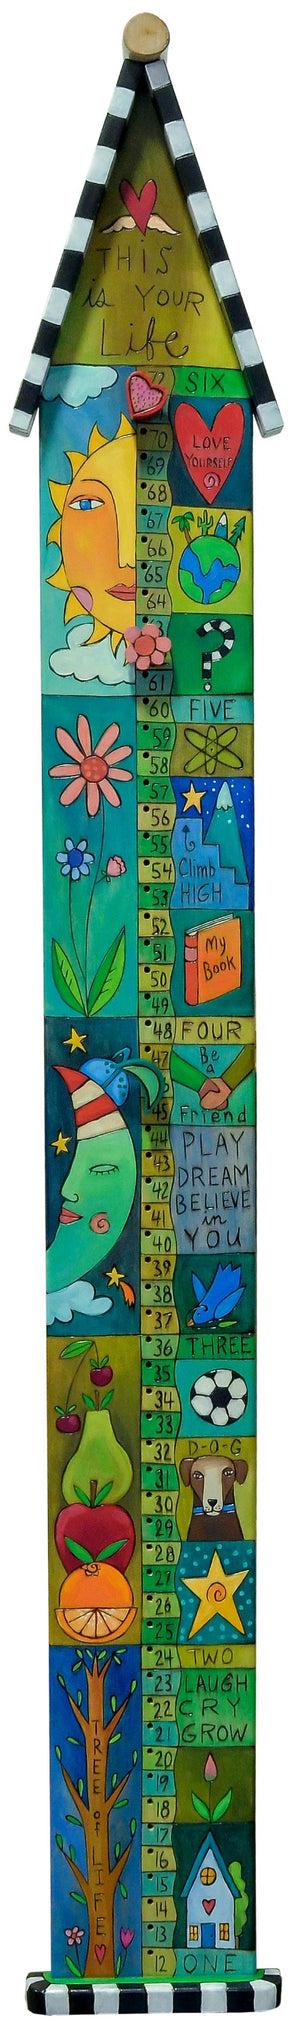 Growth Chart with Pegs – Blue and green growth chart with playful imagery mixed in with inspirational words and phrases